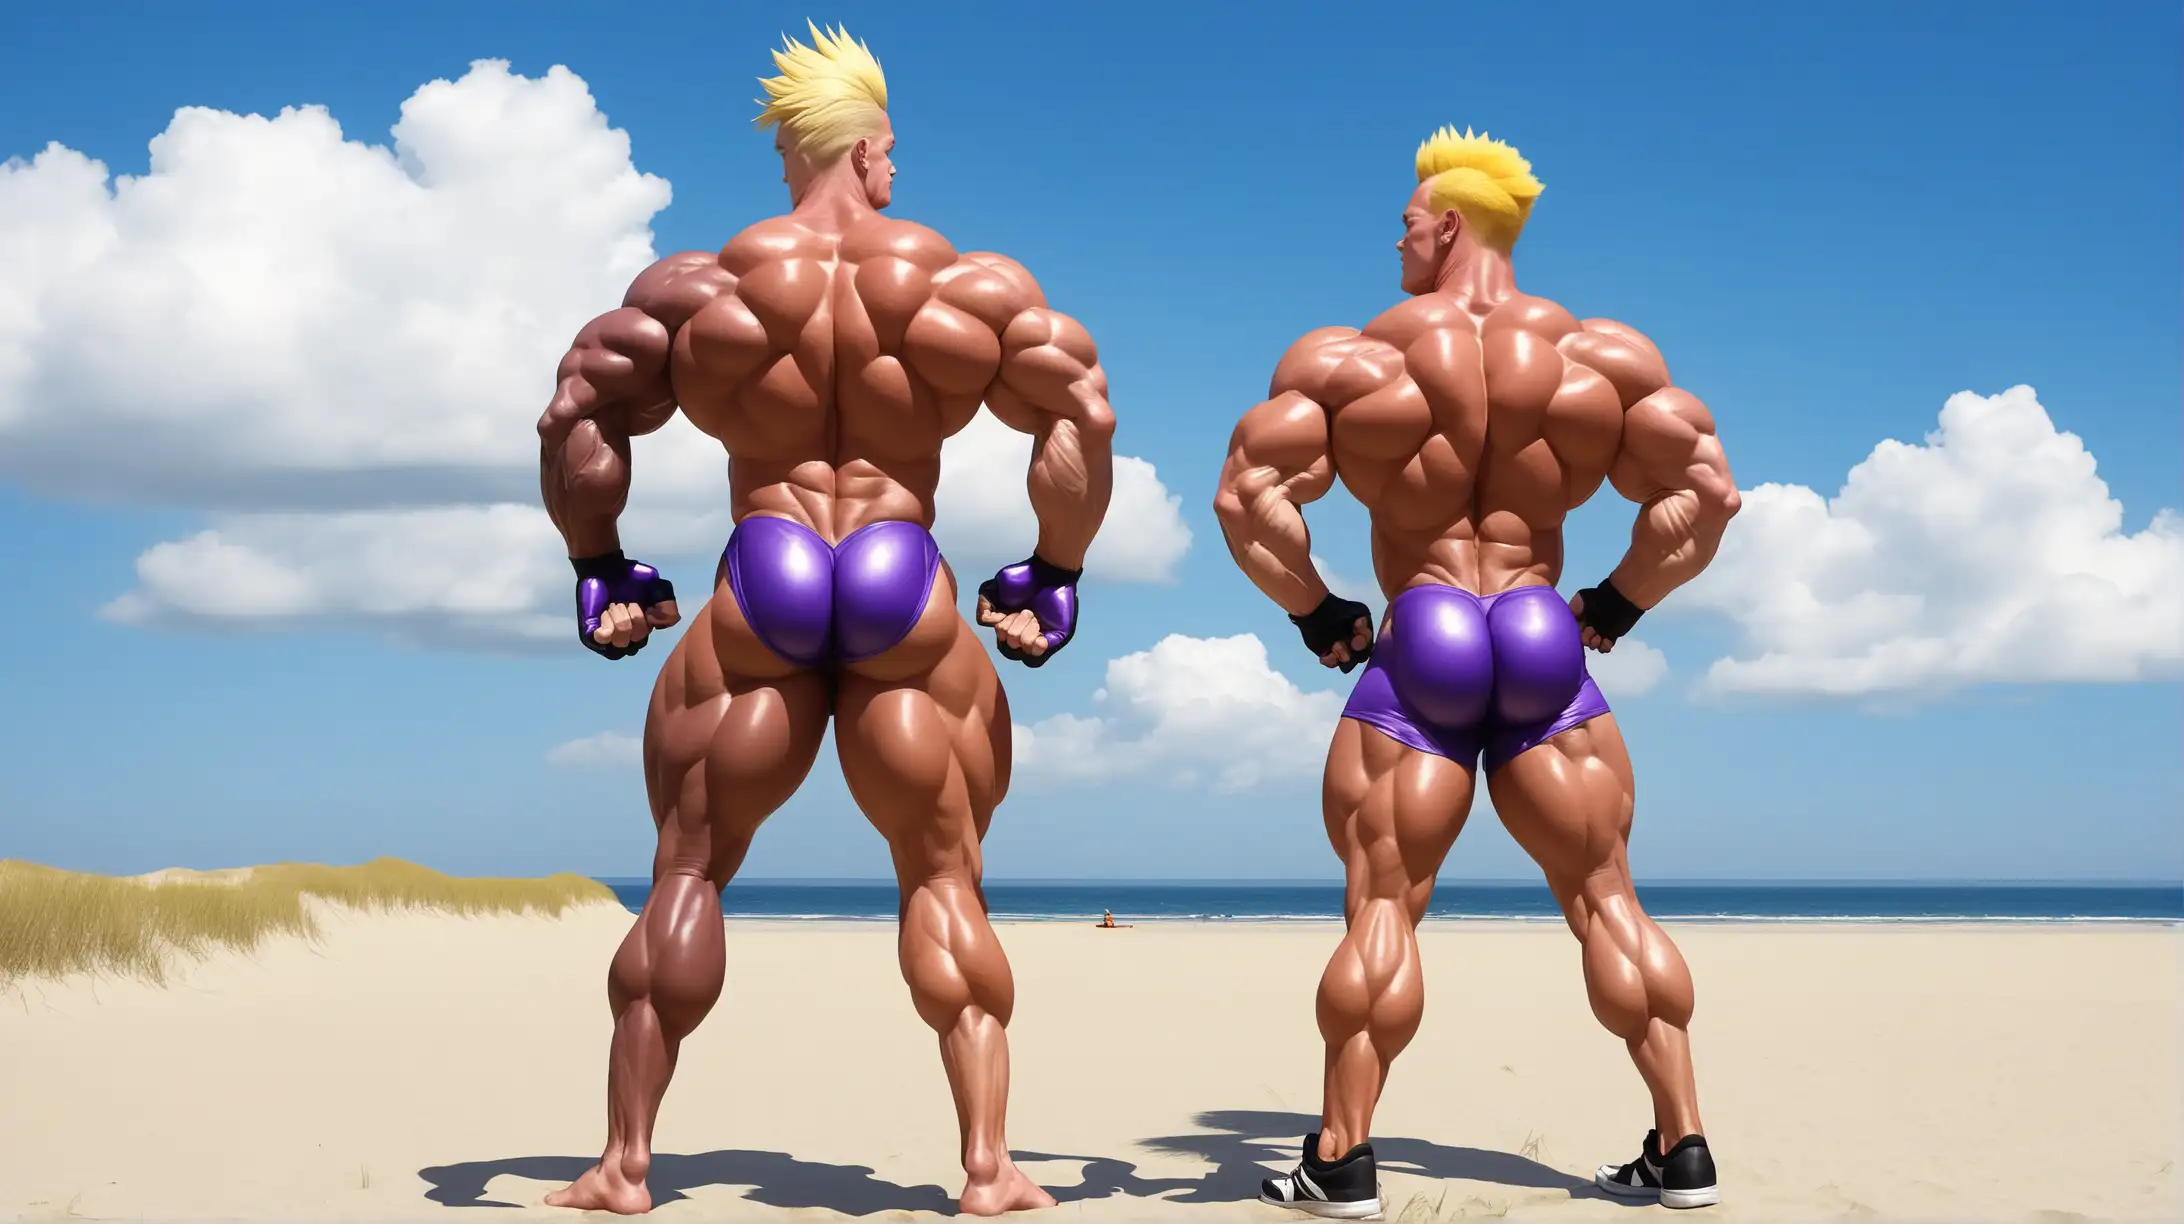 Muscle Beach Showdown Two Bodybuilders Pose in Exaggerated Muscle Display